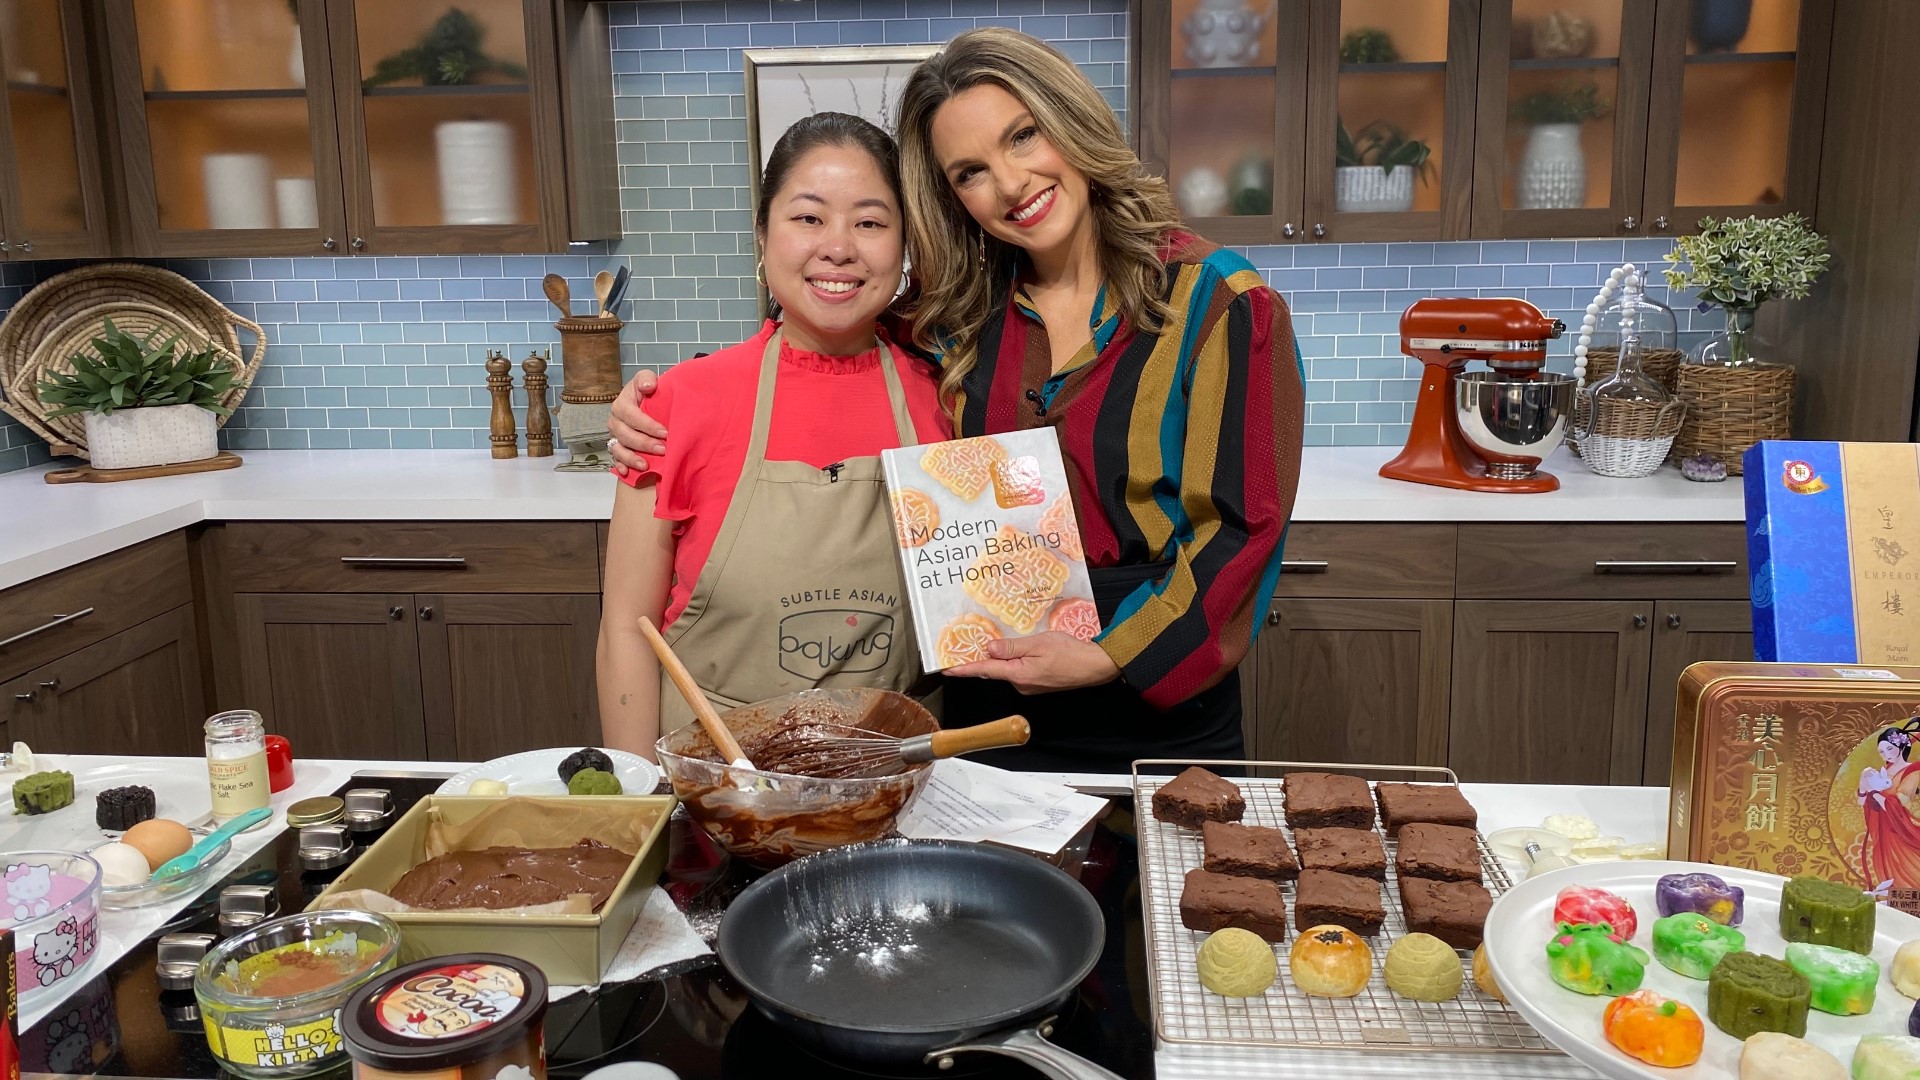 The recipe comes from the new cookbook by Kat Lieu "Modern Asian Baking at Home." #newdaynw